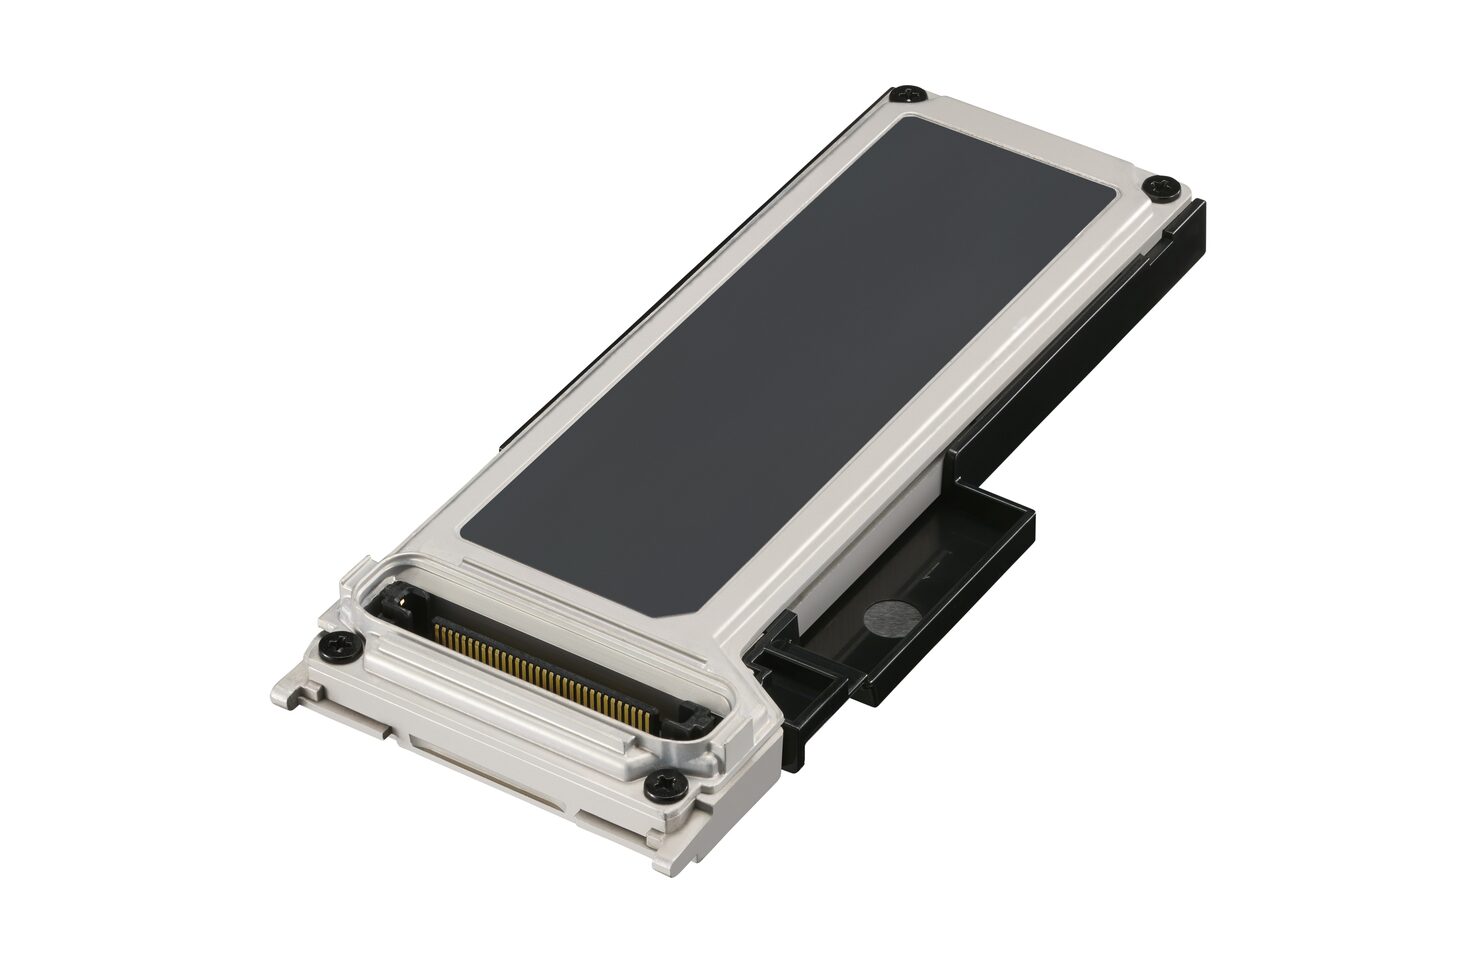 The 512GB Opal SSD Pack (FZ-VSDG25121) is designed for compatibility with TOUGHBOOK G2 Quick Release SSD.